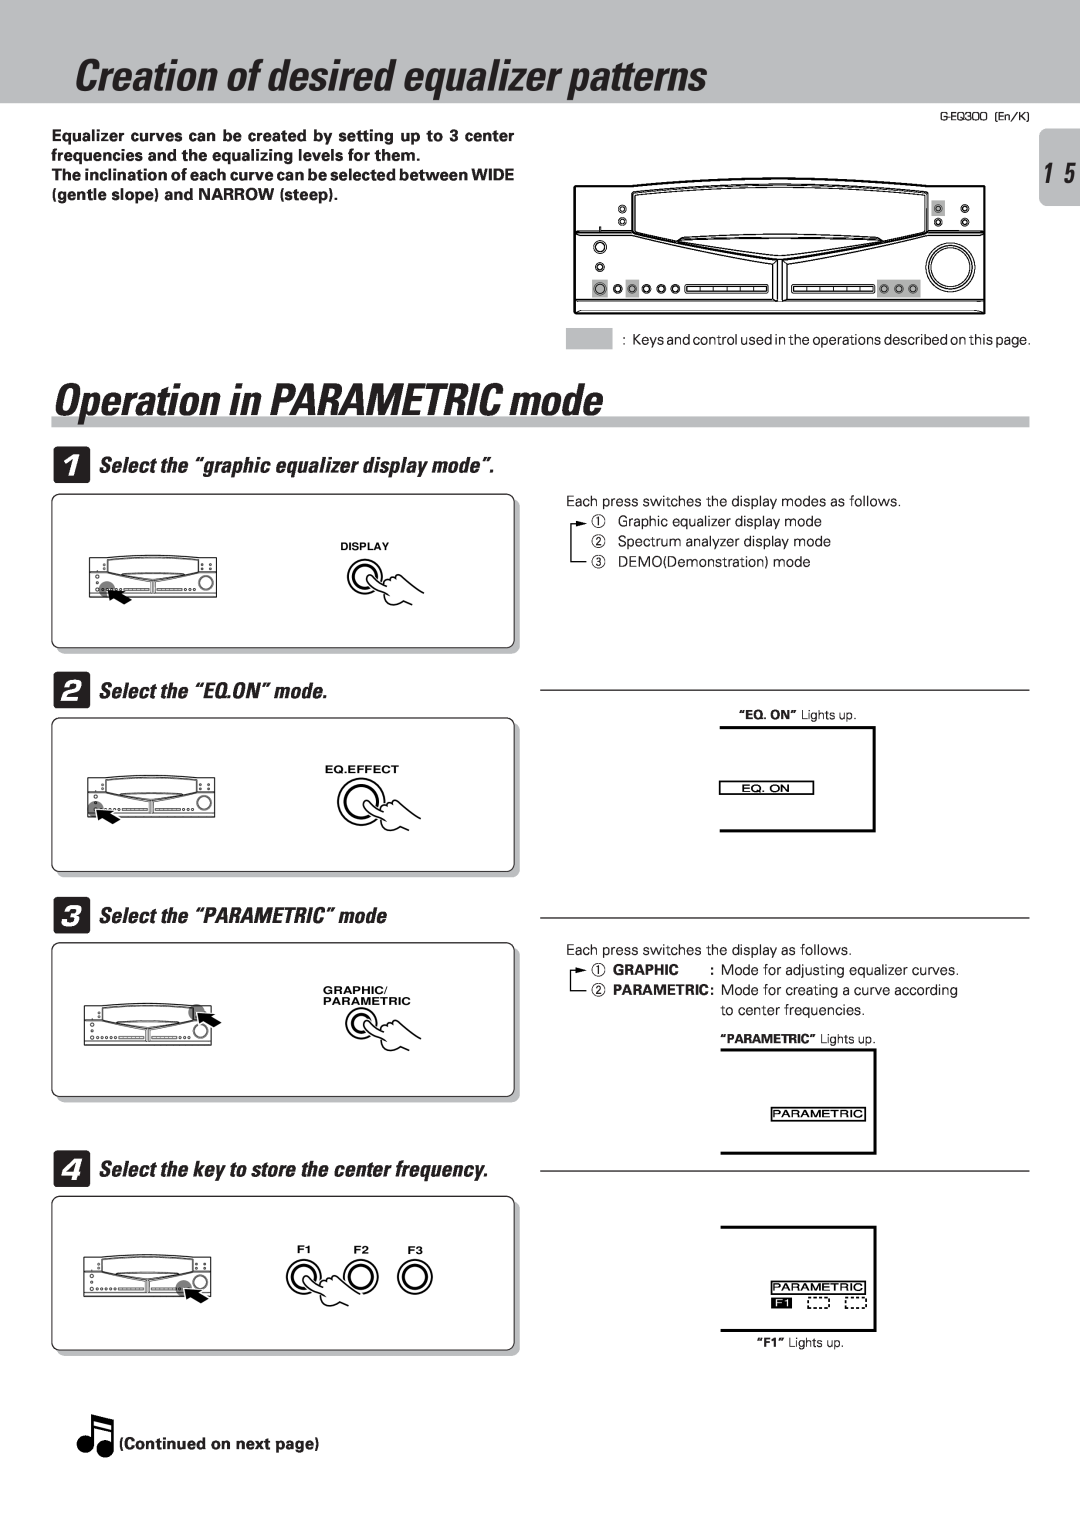 Kenwood G-EQ300 Creation of desired equalizer patterns, Operation in PARAMETRIC mode, Select the “EQ.ON” mode 